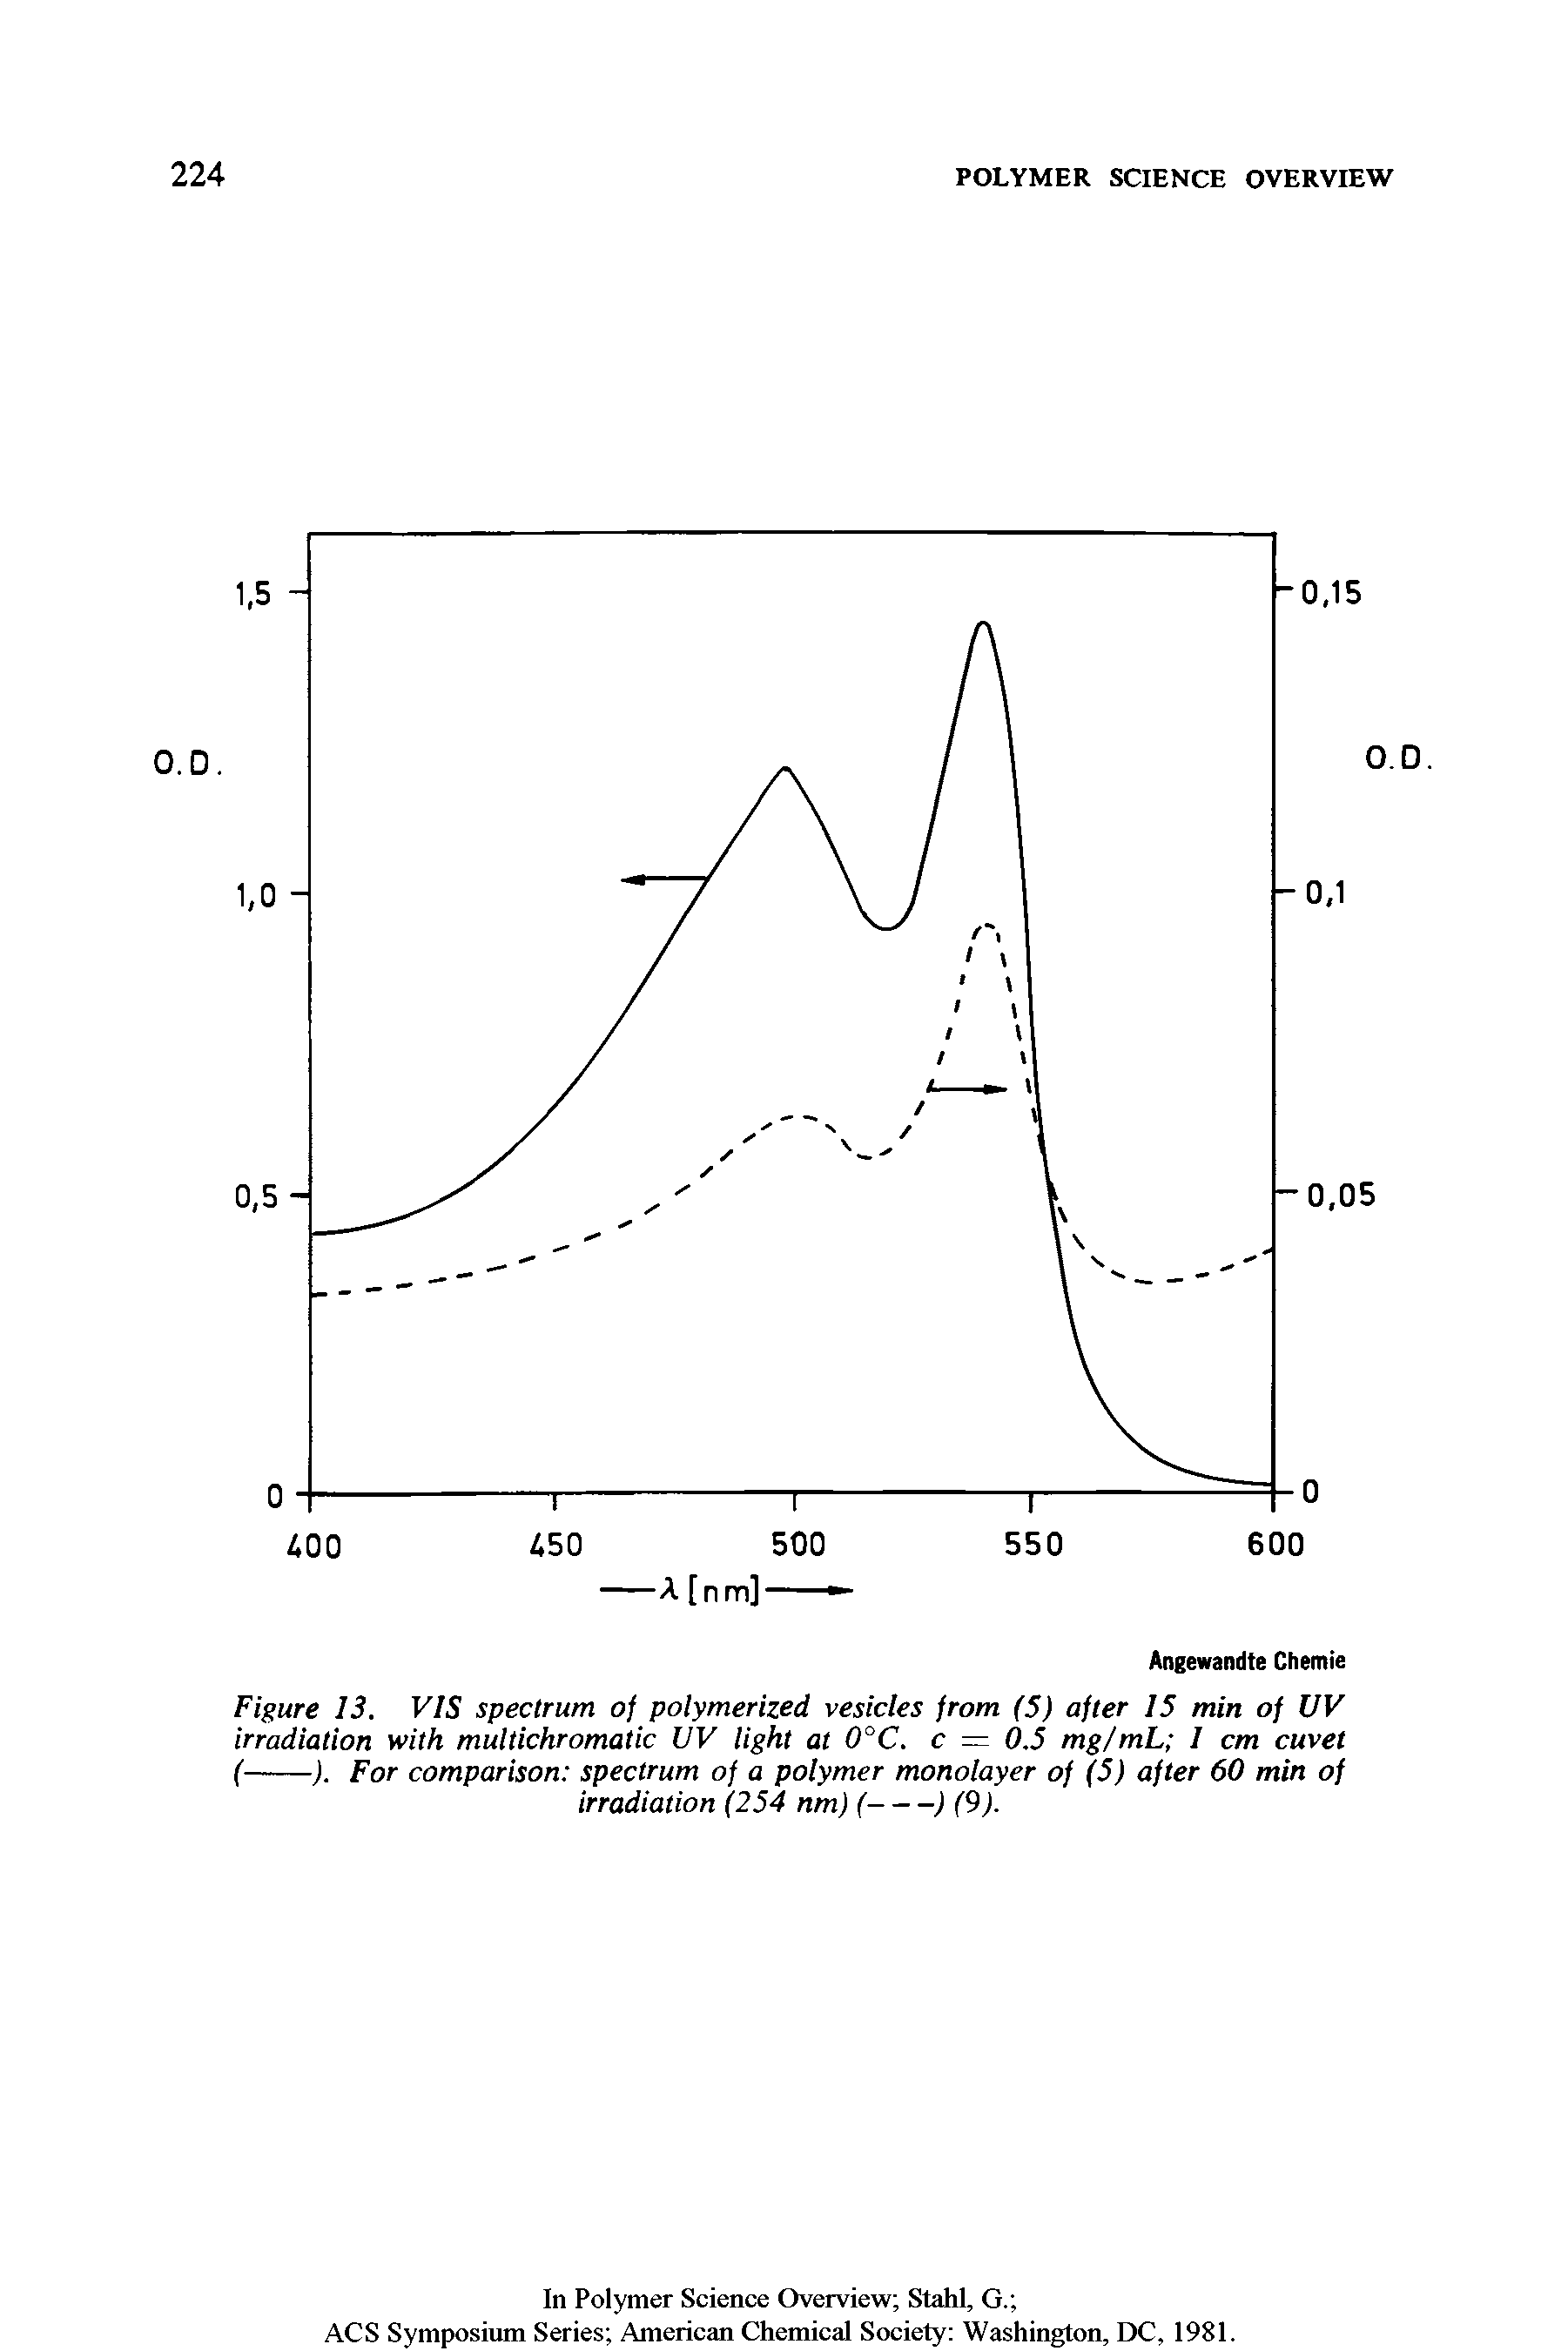 Figure 13. VIS spectrum of polymerized vesicles from (5) after 15 min of UV irradiation with multichromatic UV light at 0°C. c = 0.5 mg/mL I cm cuvet...